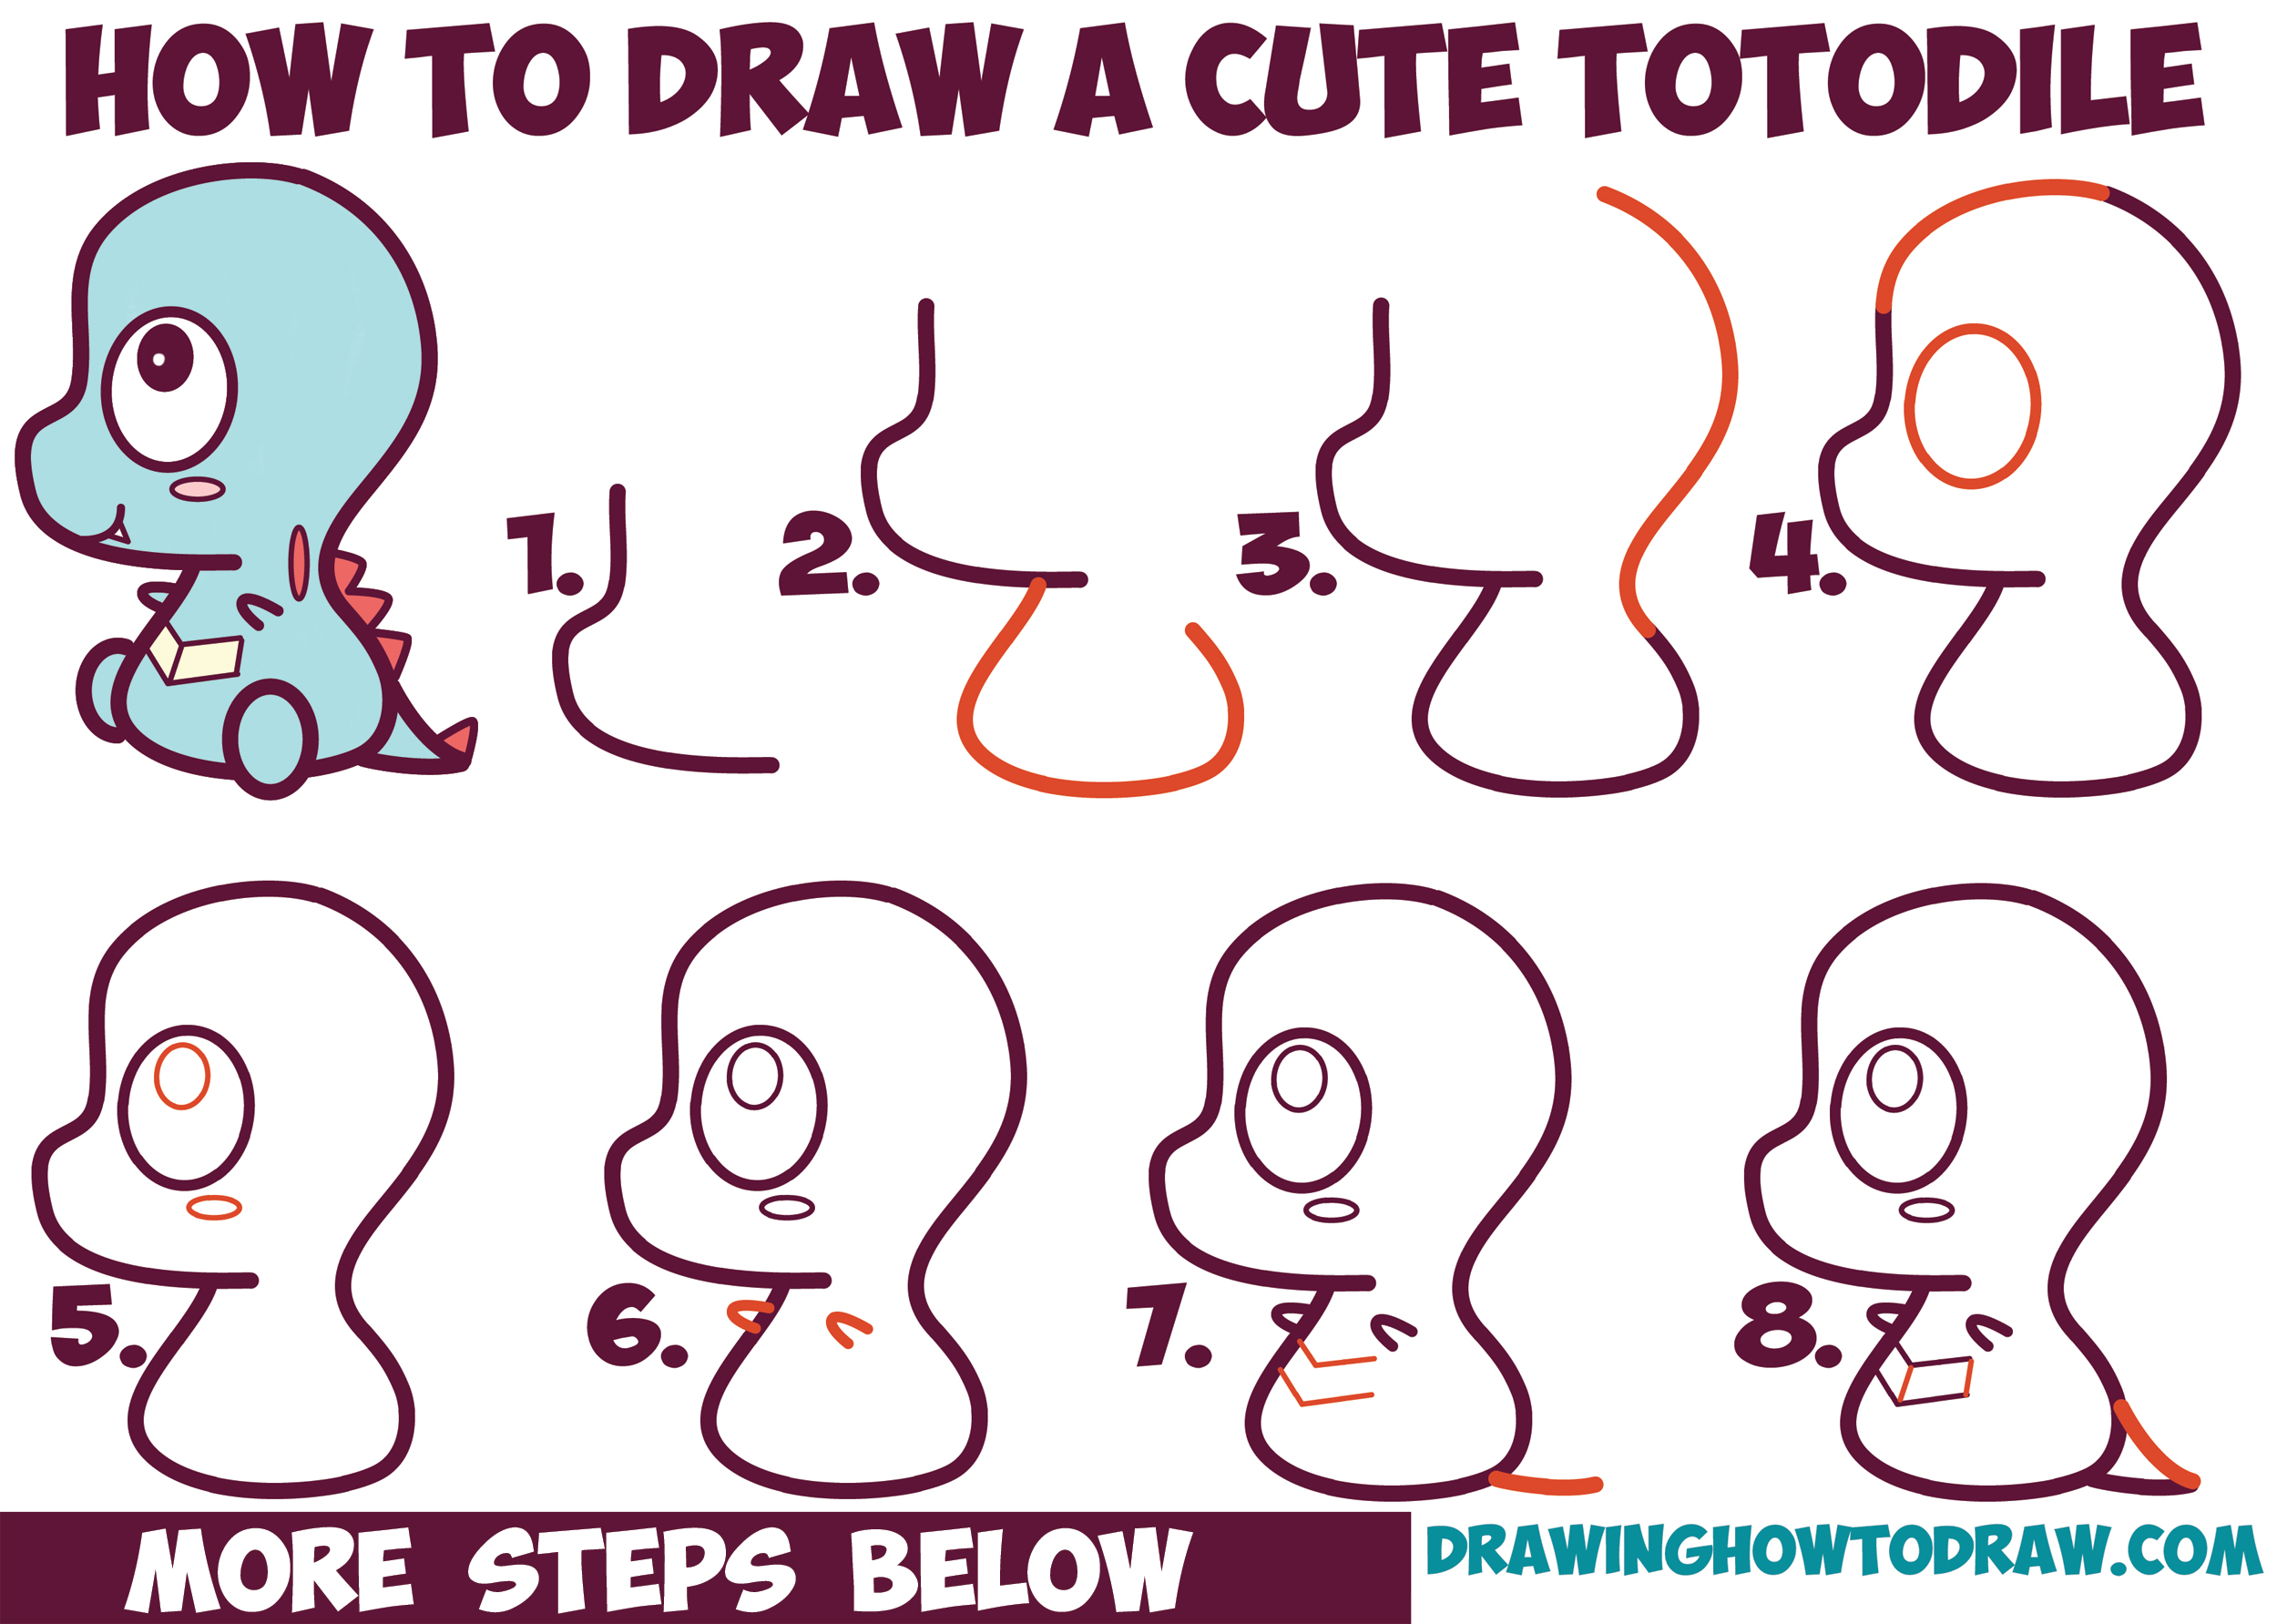 How to Draw Cute / Chibi / Kawaii Totodile from Pokemon with Easy Step by Step Drawing Tutorial for Kids / Beginners